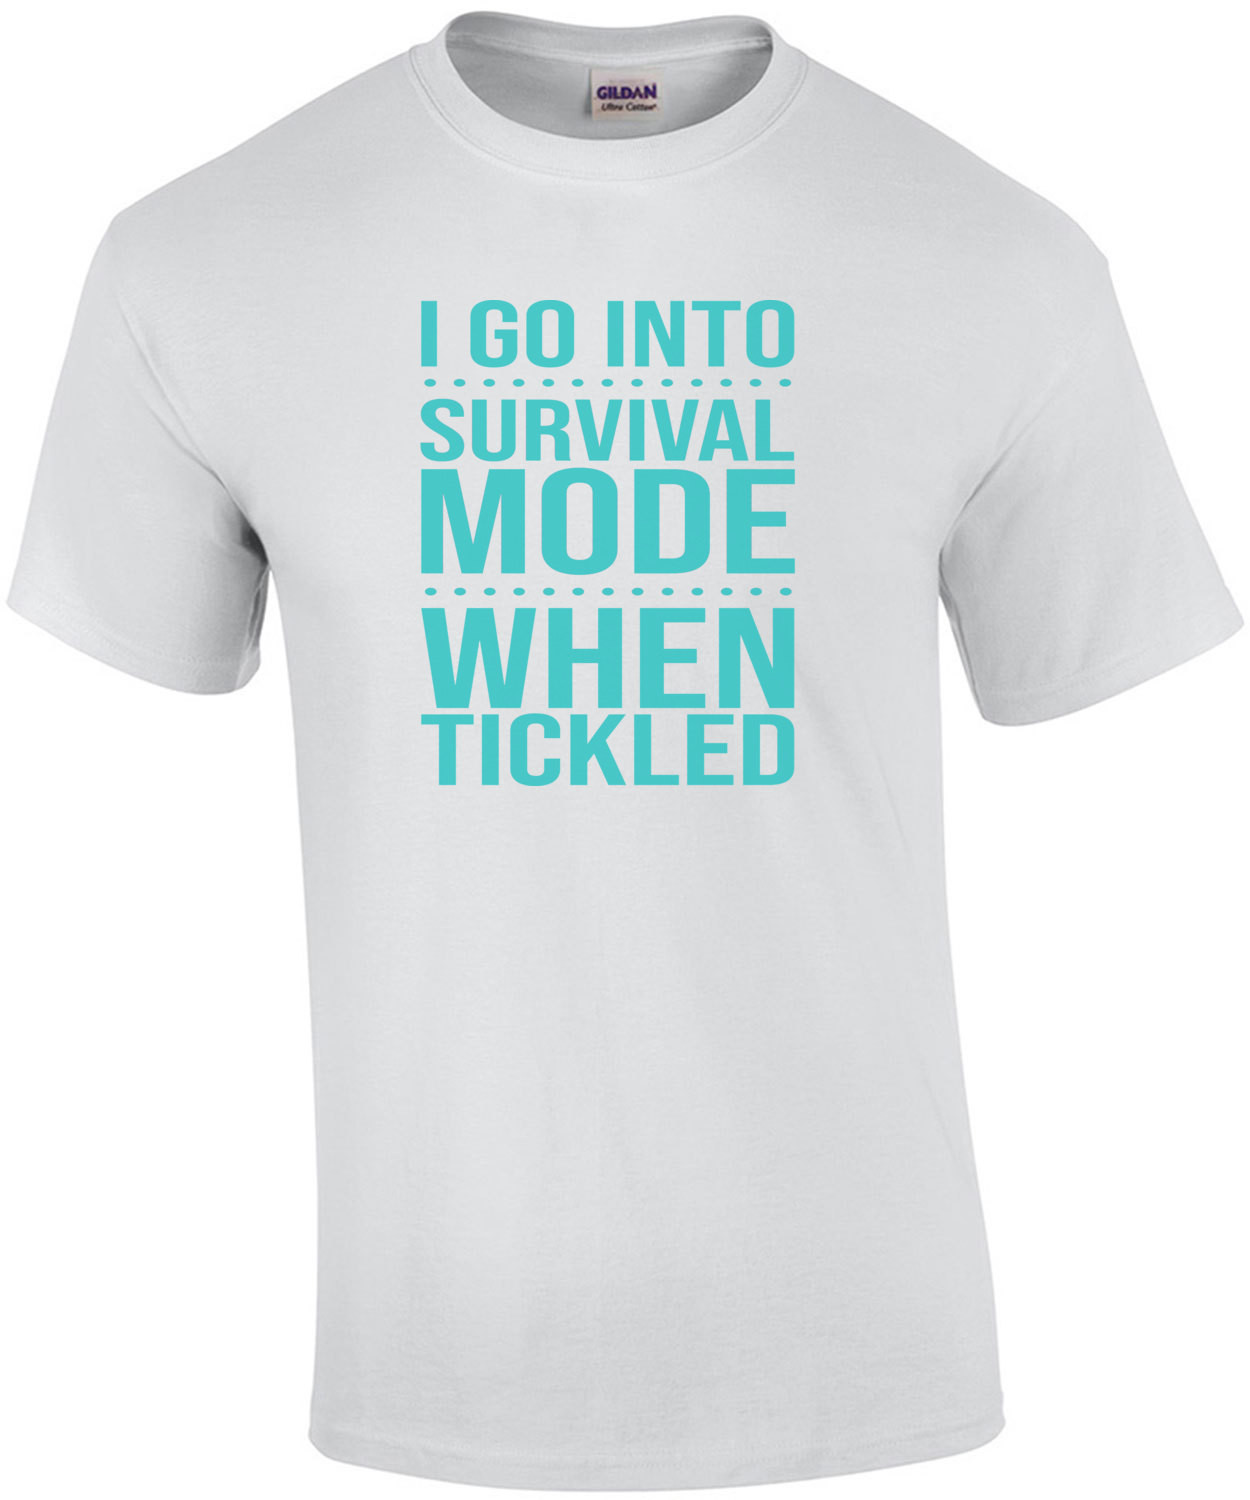 I go into survival mode when tickled - funny t-shirt